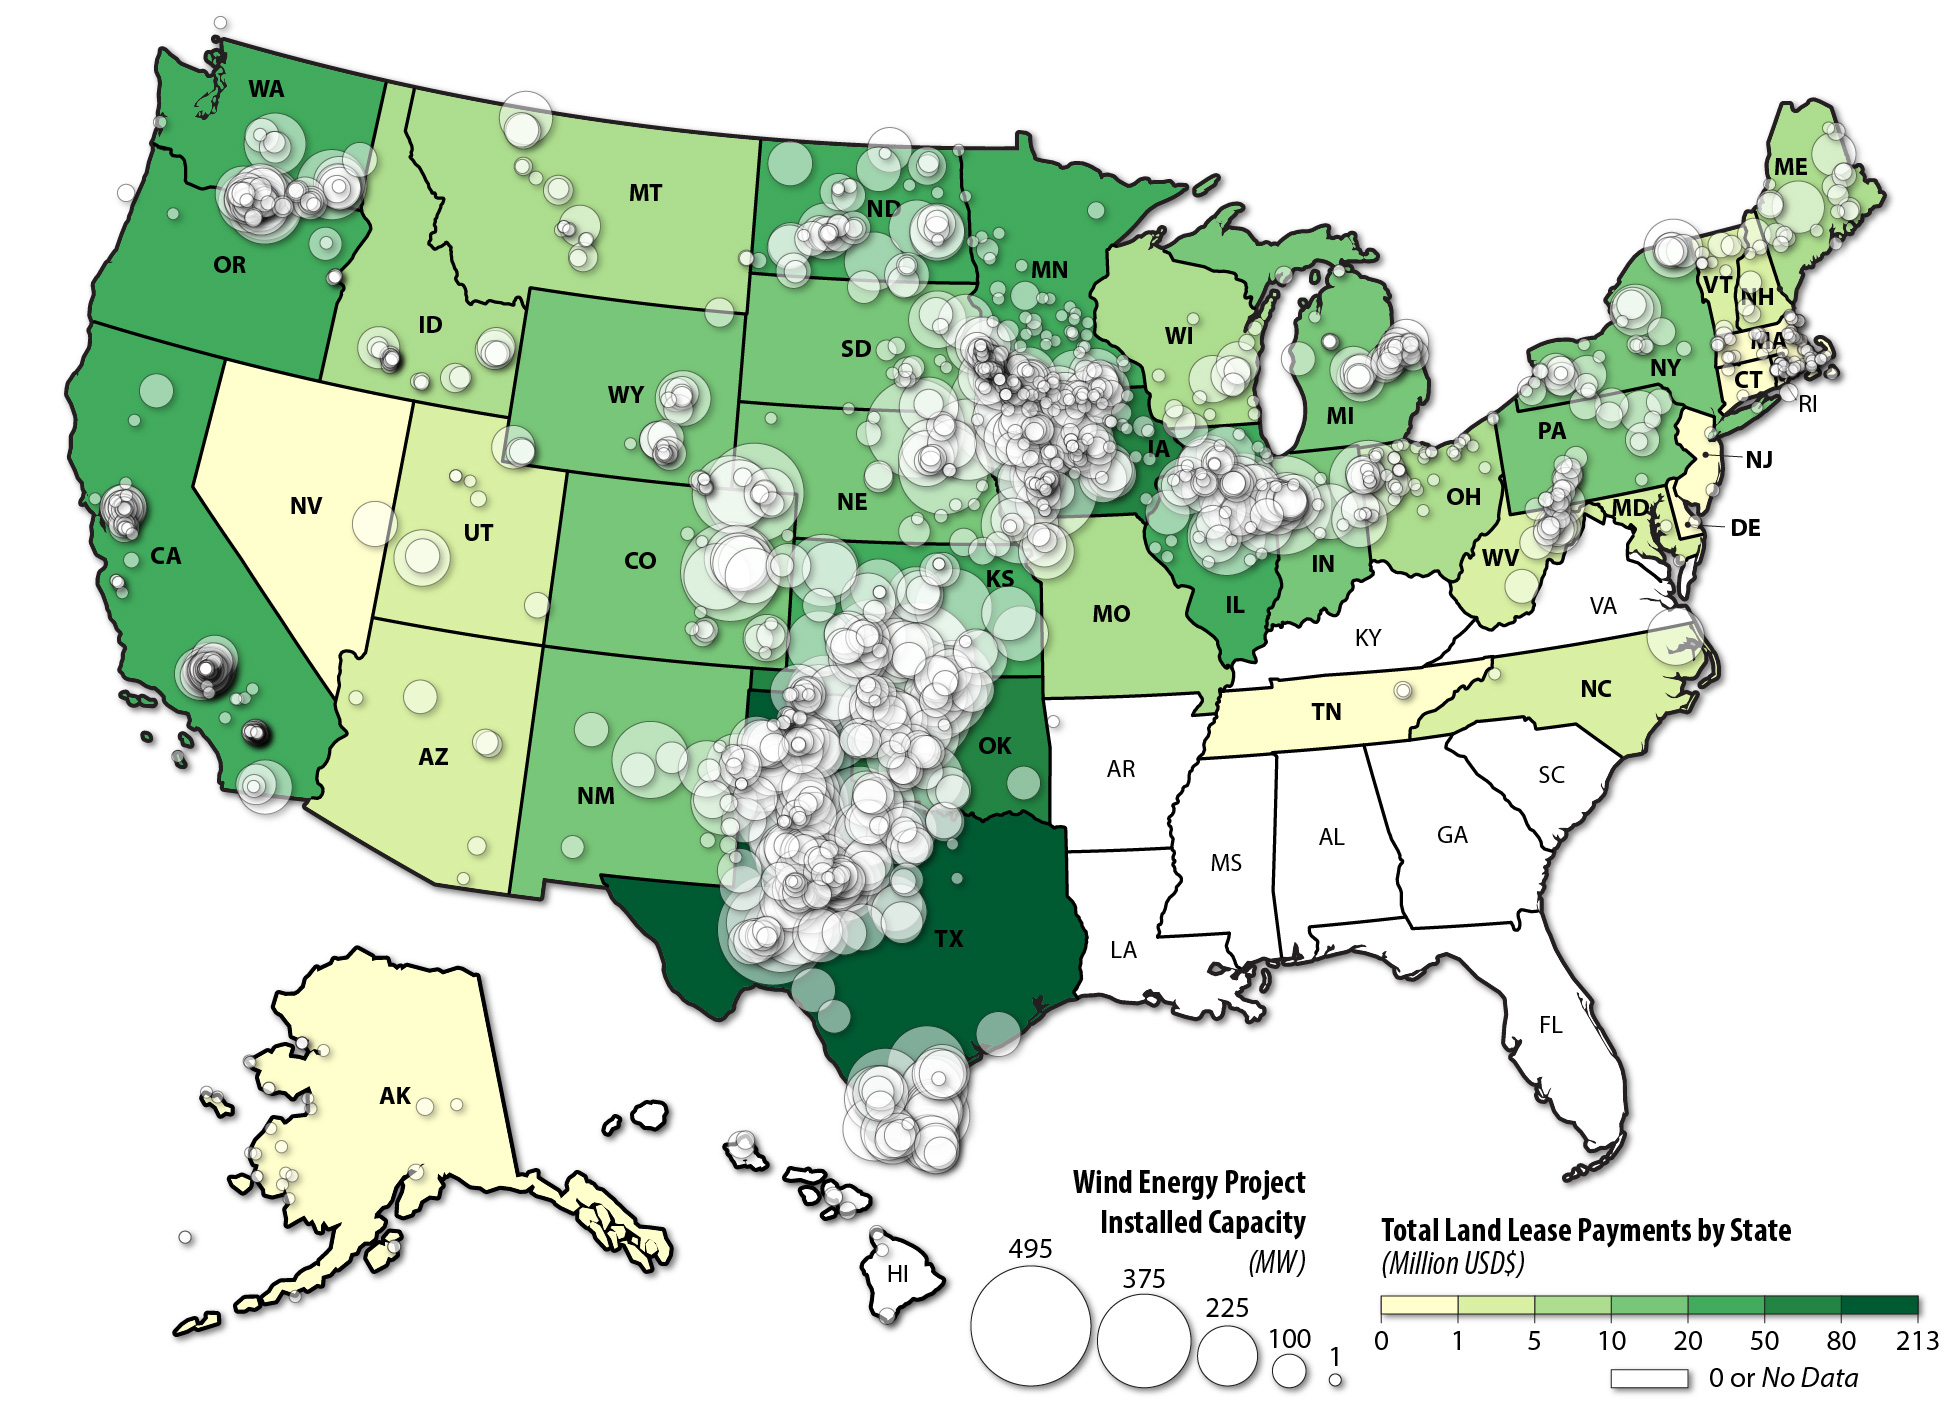 Map of installed U.S. wind energy projects and their capacities overlain on states' total reoccurring long-term revenue for 2019 